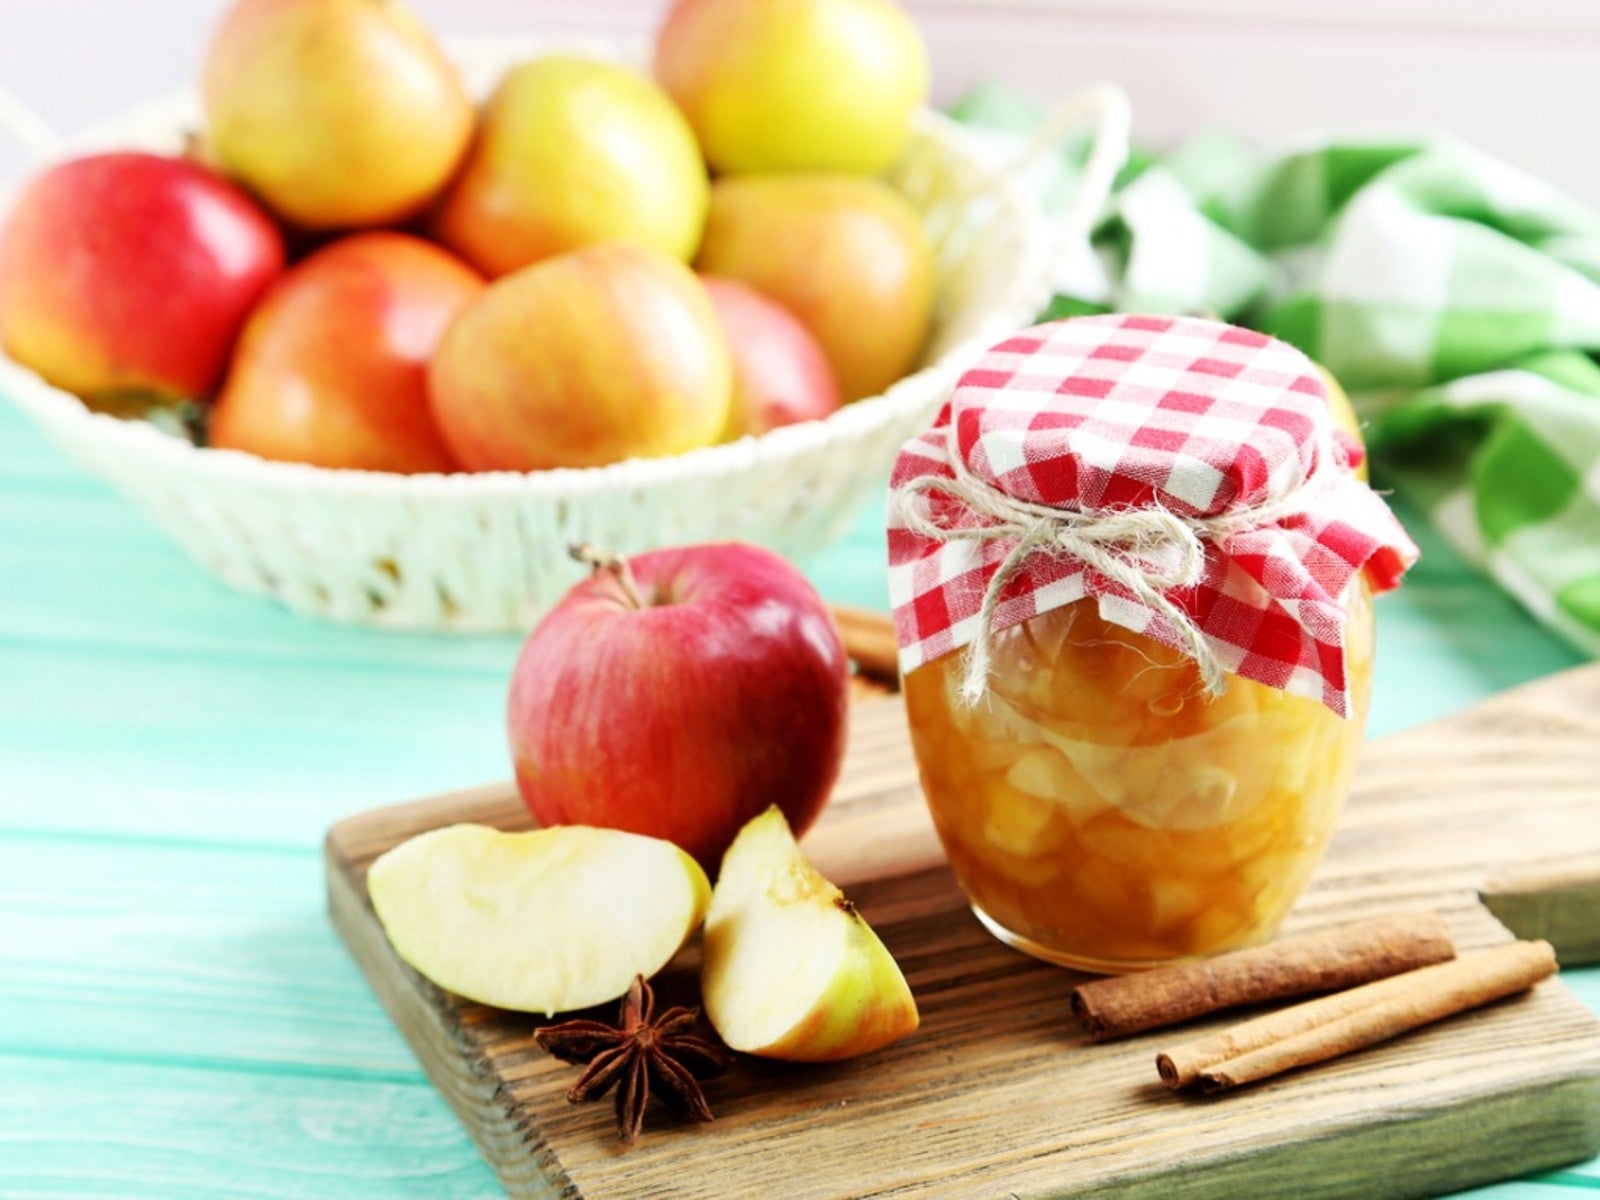 Sliced apple and cinnamon sticks next to a jar of preserved apples, with a bowl of whole apples in the background